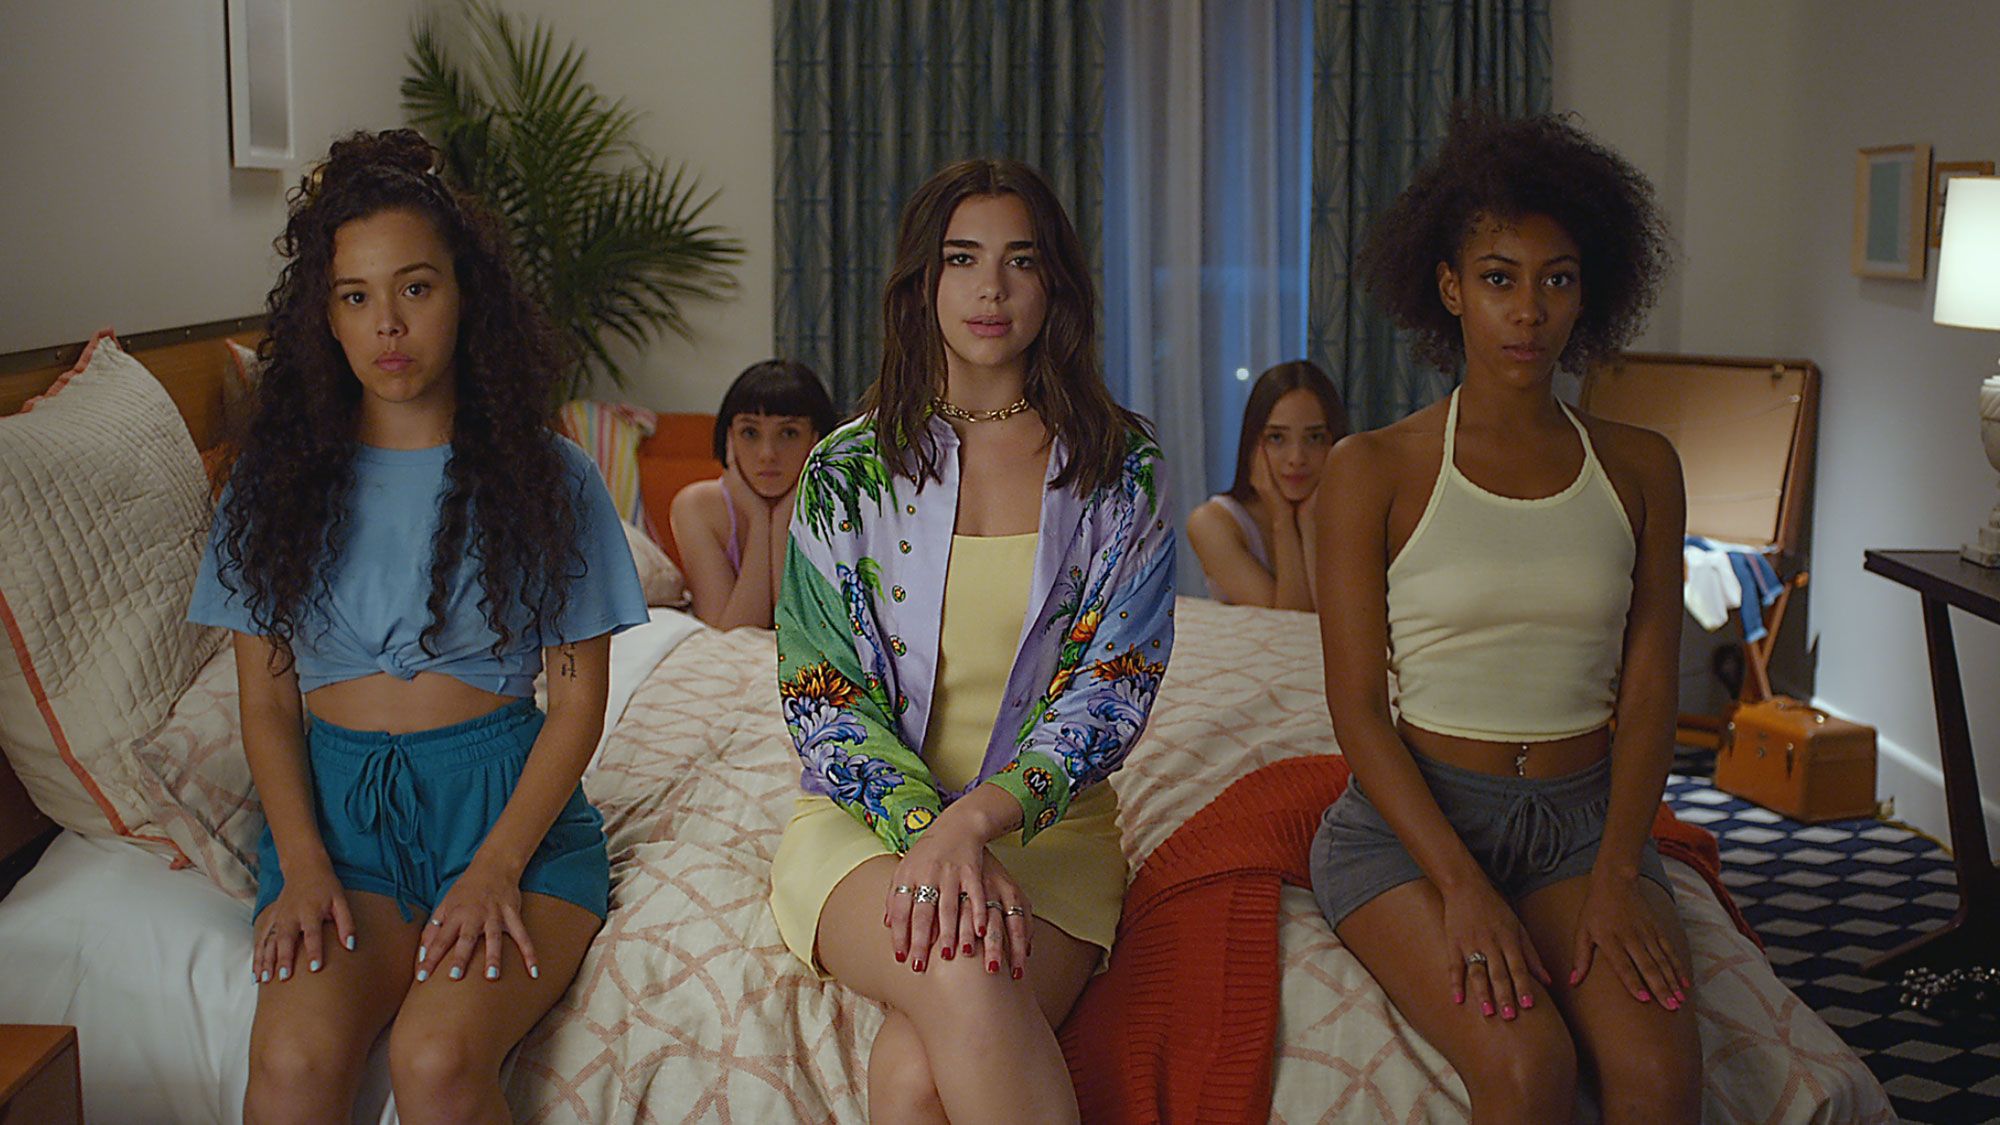 Dua Lipa Takes Us Behind the Scenes of the 'New Rules' Video